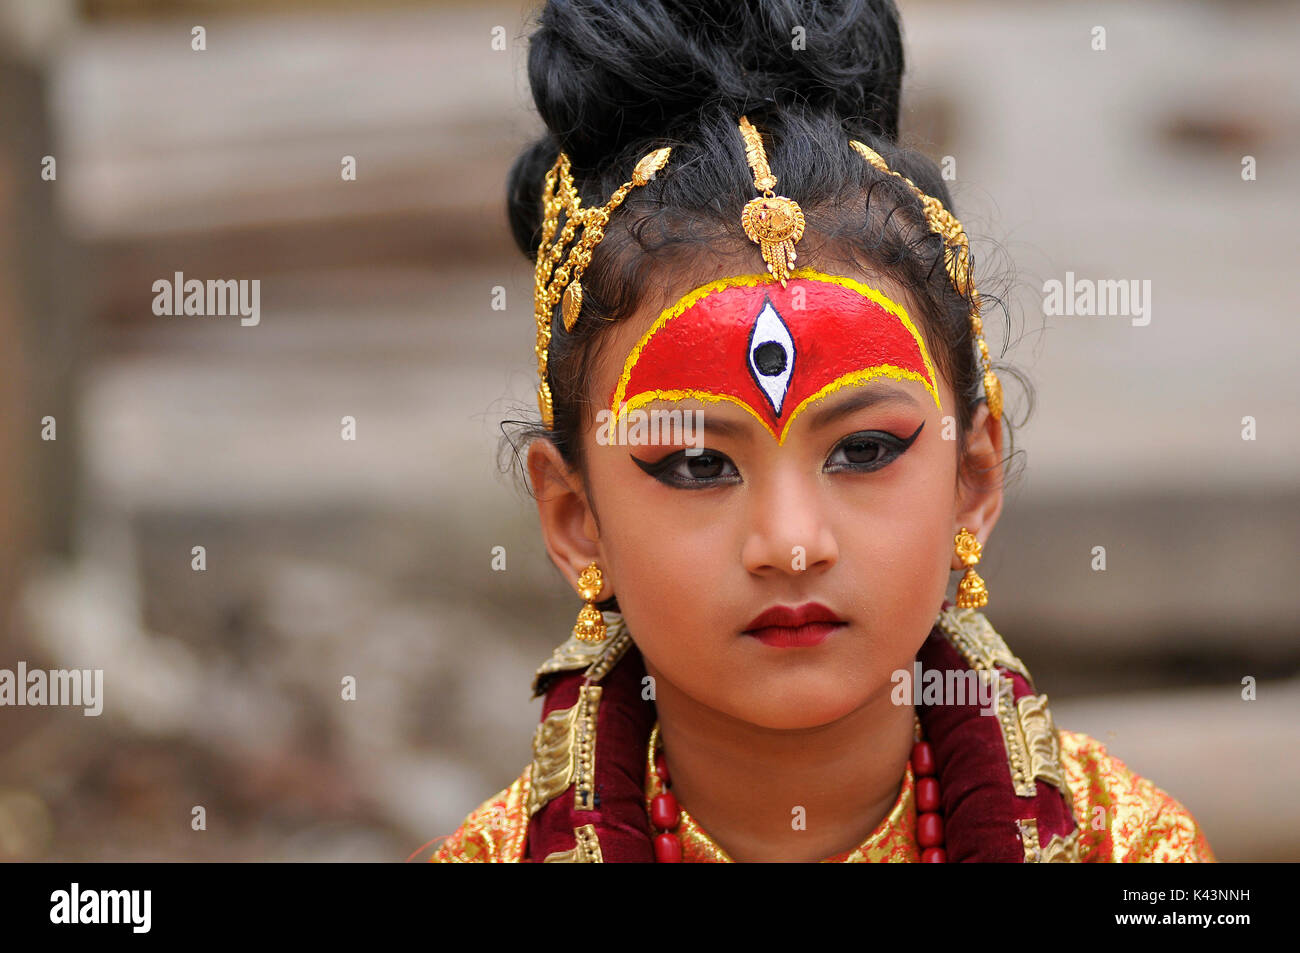 Kathmandu, Nepal. 04th Sep, 2017. A Portrait of Nepalese young girl impersonate as a Kumari or living Goddess participate during celebration of Kumari puja at Basantapur Durbar Square, Katmandu, Nepal on Monday, September 04, 2017. Altogether 108 young girls under the age of nine gathered for the Kumari puja, a tradition of worshiping, which believes doing puja save small girls from diseases and bad luck in future. Credit: Narayan Maharjan/Pacific Press/Alamy Live News Stock Photo